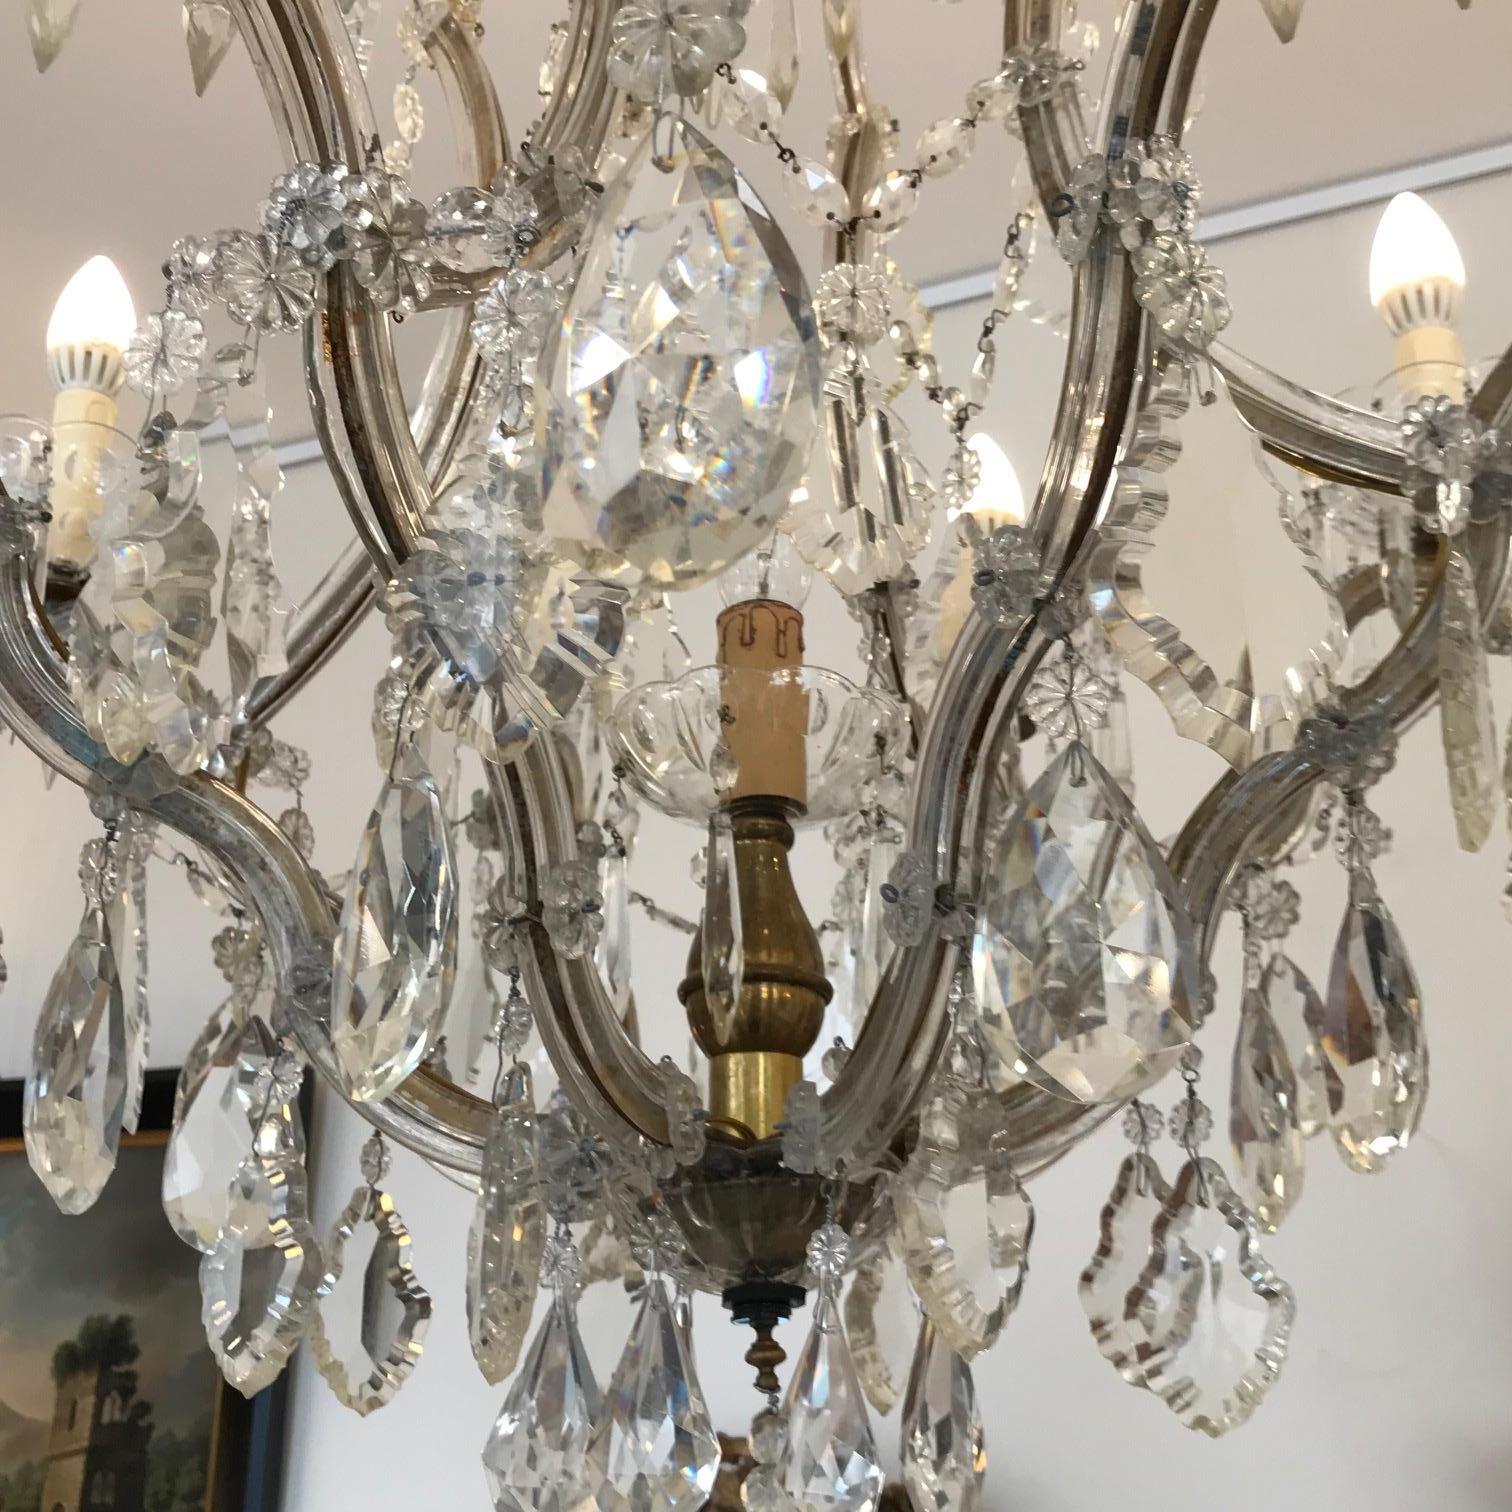 Austrian Maria Theresa style chandelier with hand-forget gilt metal basket shape frame sheathed in hand catted glass. Inside of 6 candle arms is a central light.